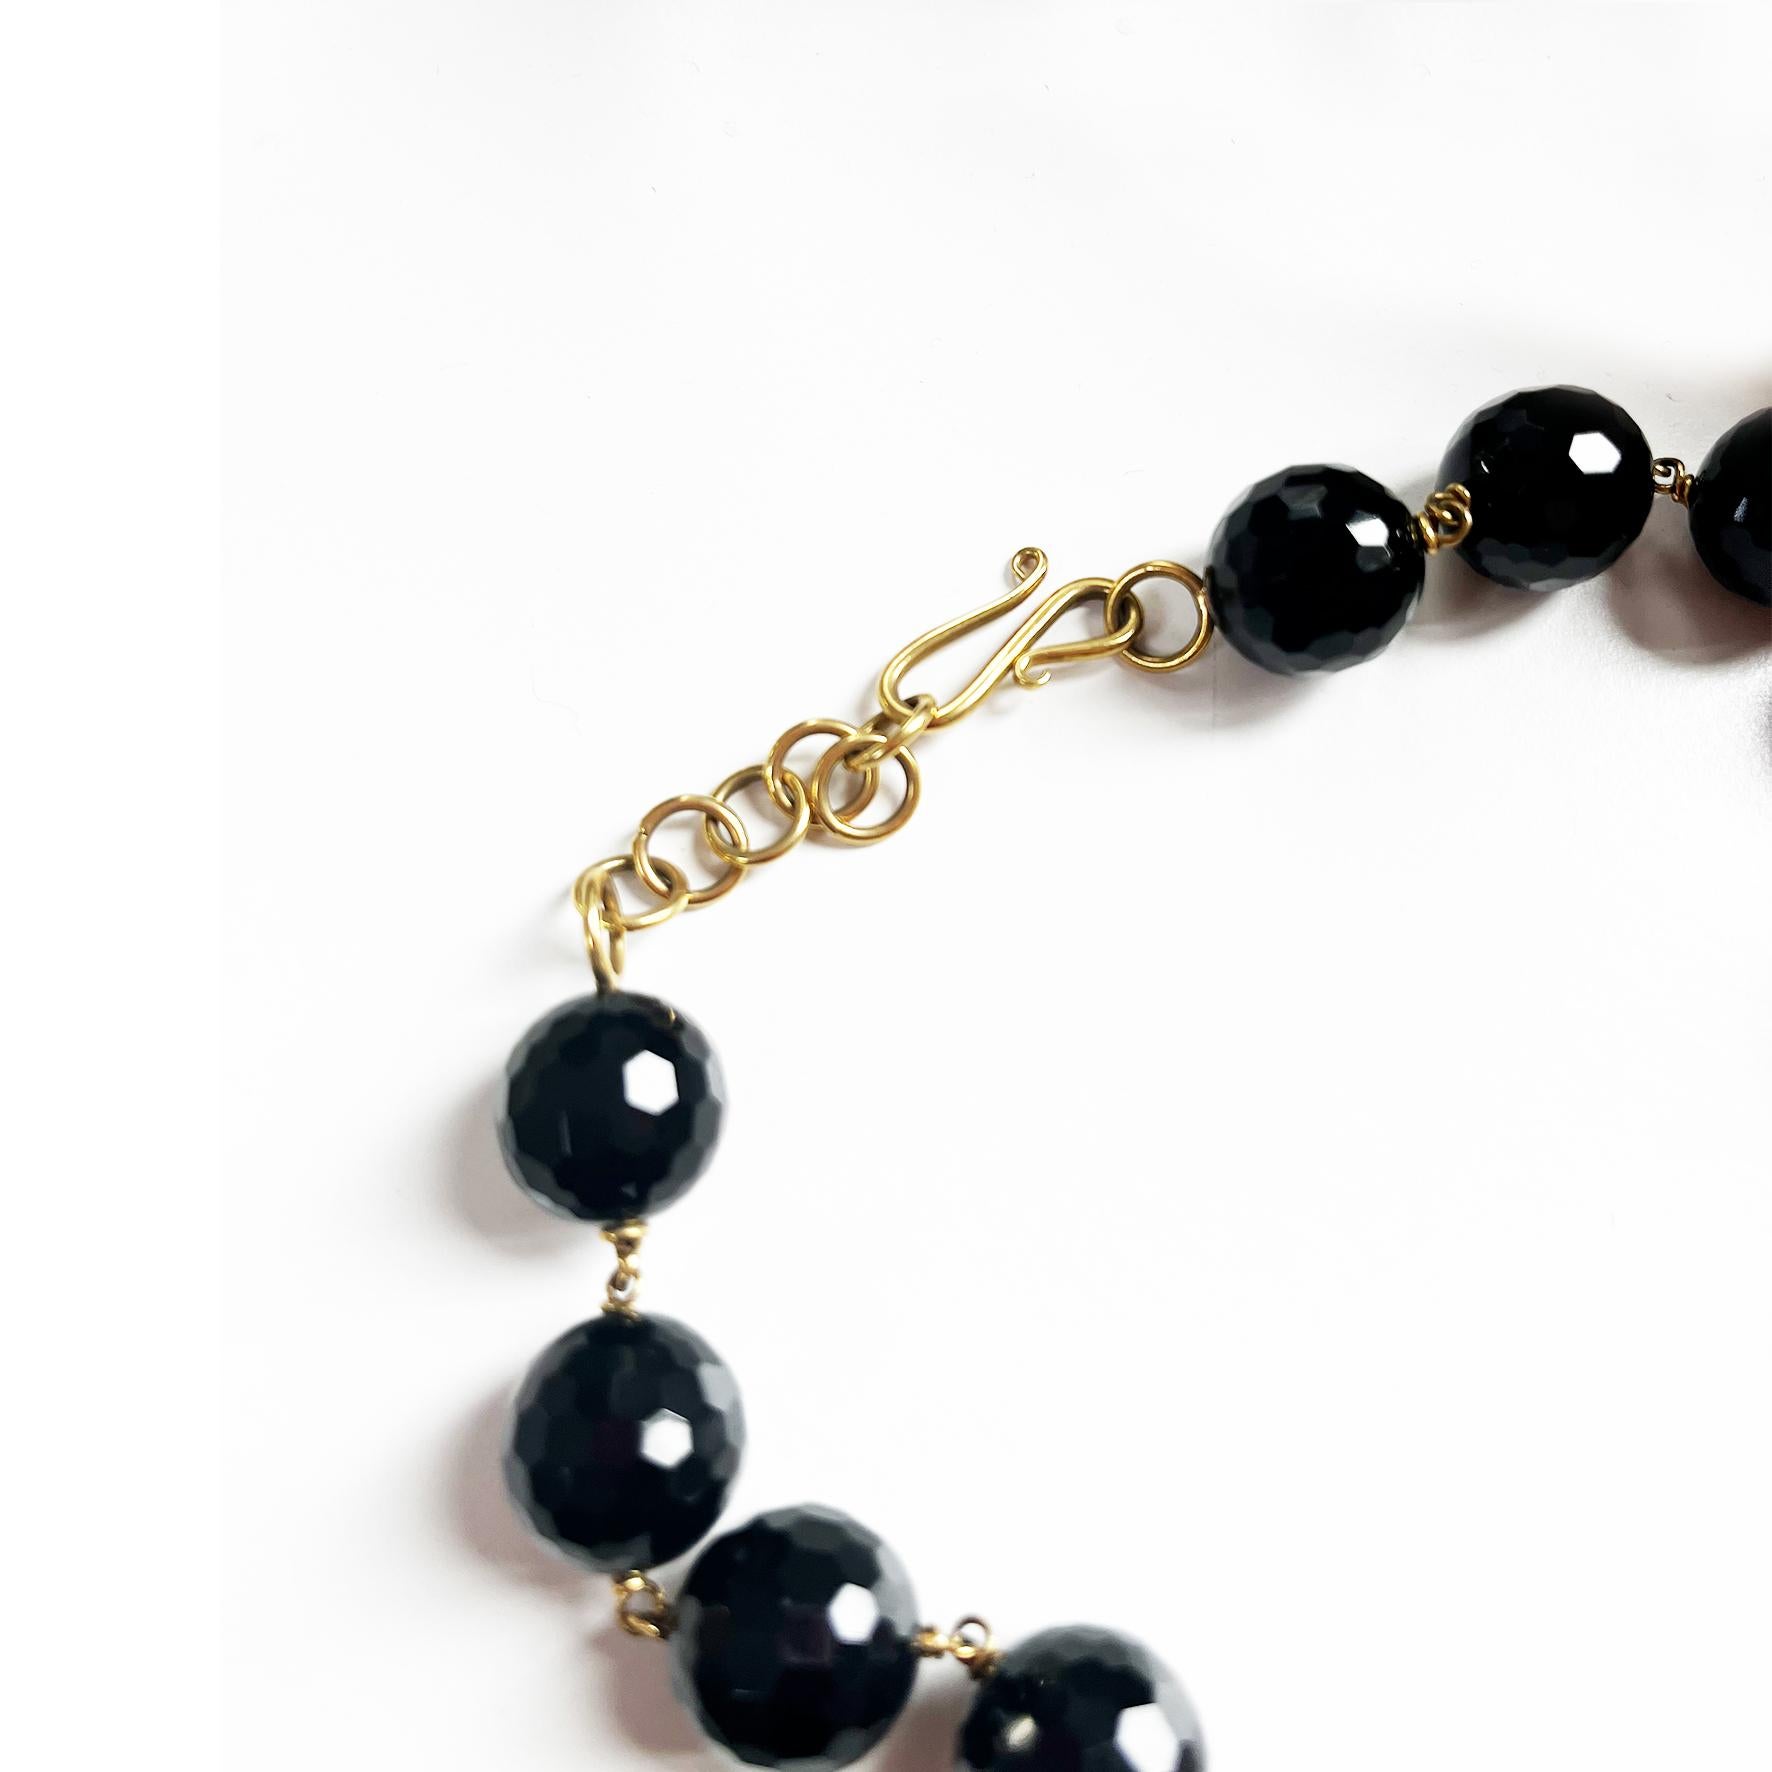 This 18KT pink gold necklace with black Onyx faceted beads and citrine & pearls pendants is a beautifully designed piece. The 4 pendants create a visually stunning and unique necklace giving a touch of light to the neck in contrast with the black